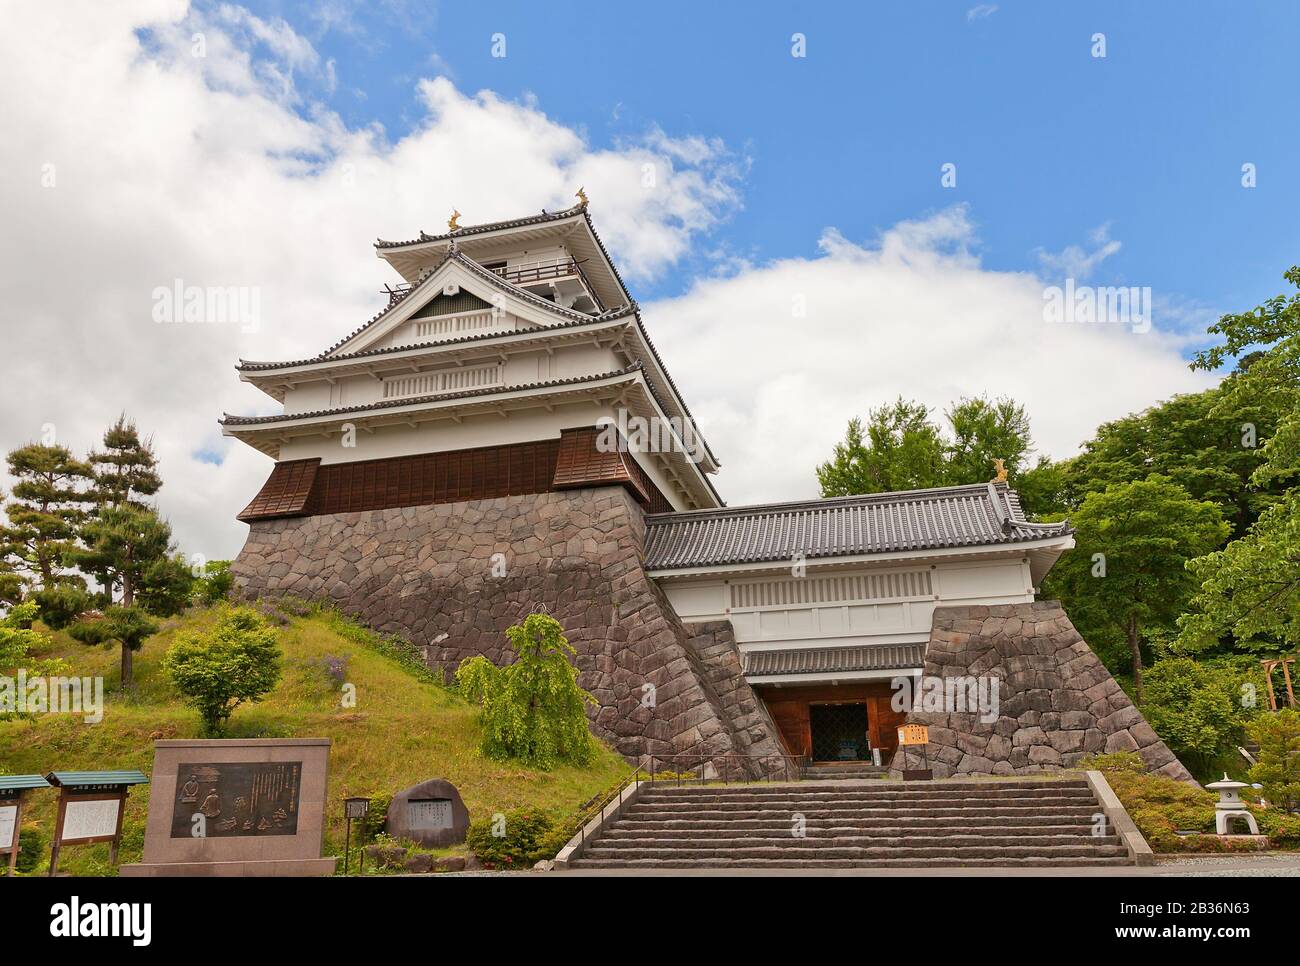 Main Keep (donjon) of Kaminoyama Castle, Japan. Castle was founded in 1535 by Takenaga Yoshitada, destroyed in 1692 and reconstructed in 1982 Stock Photo